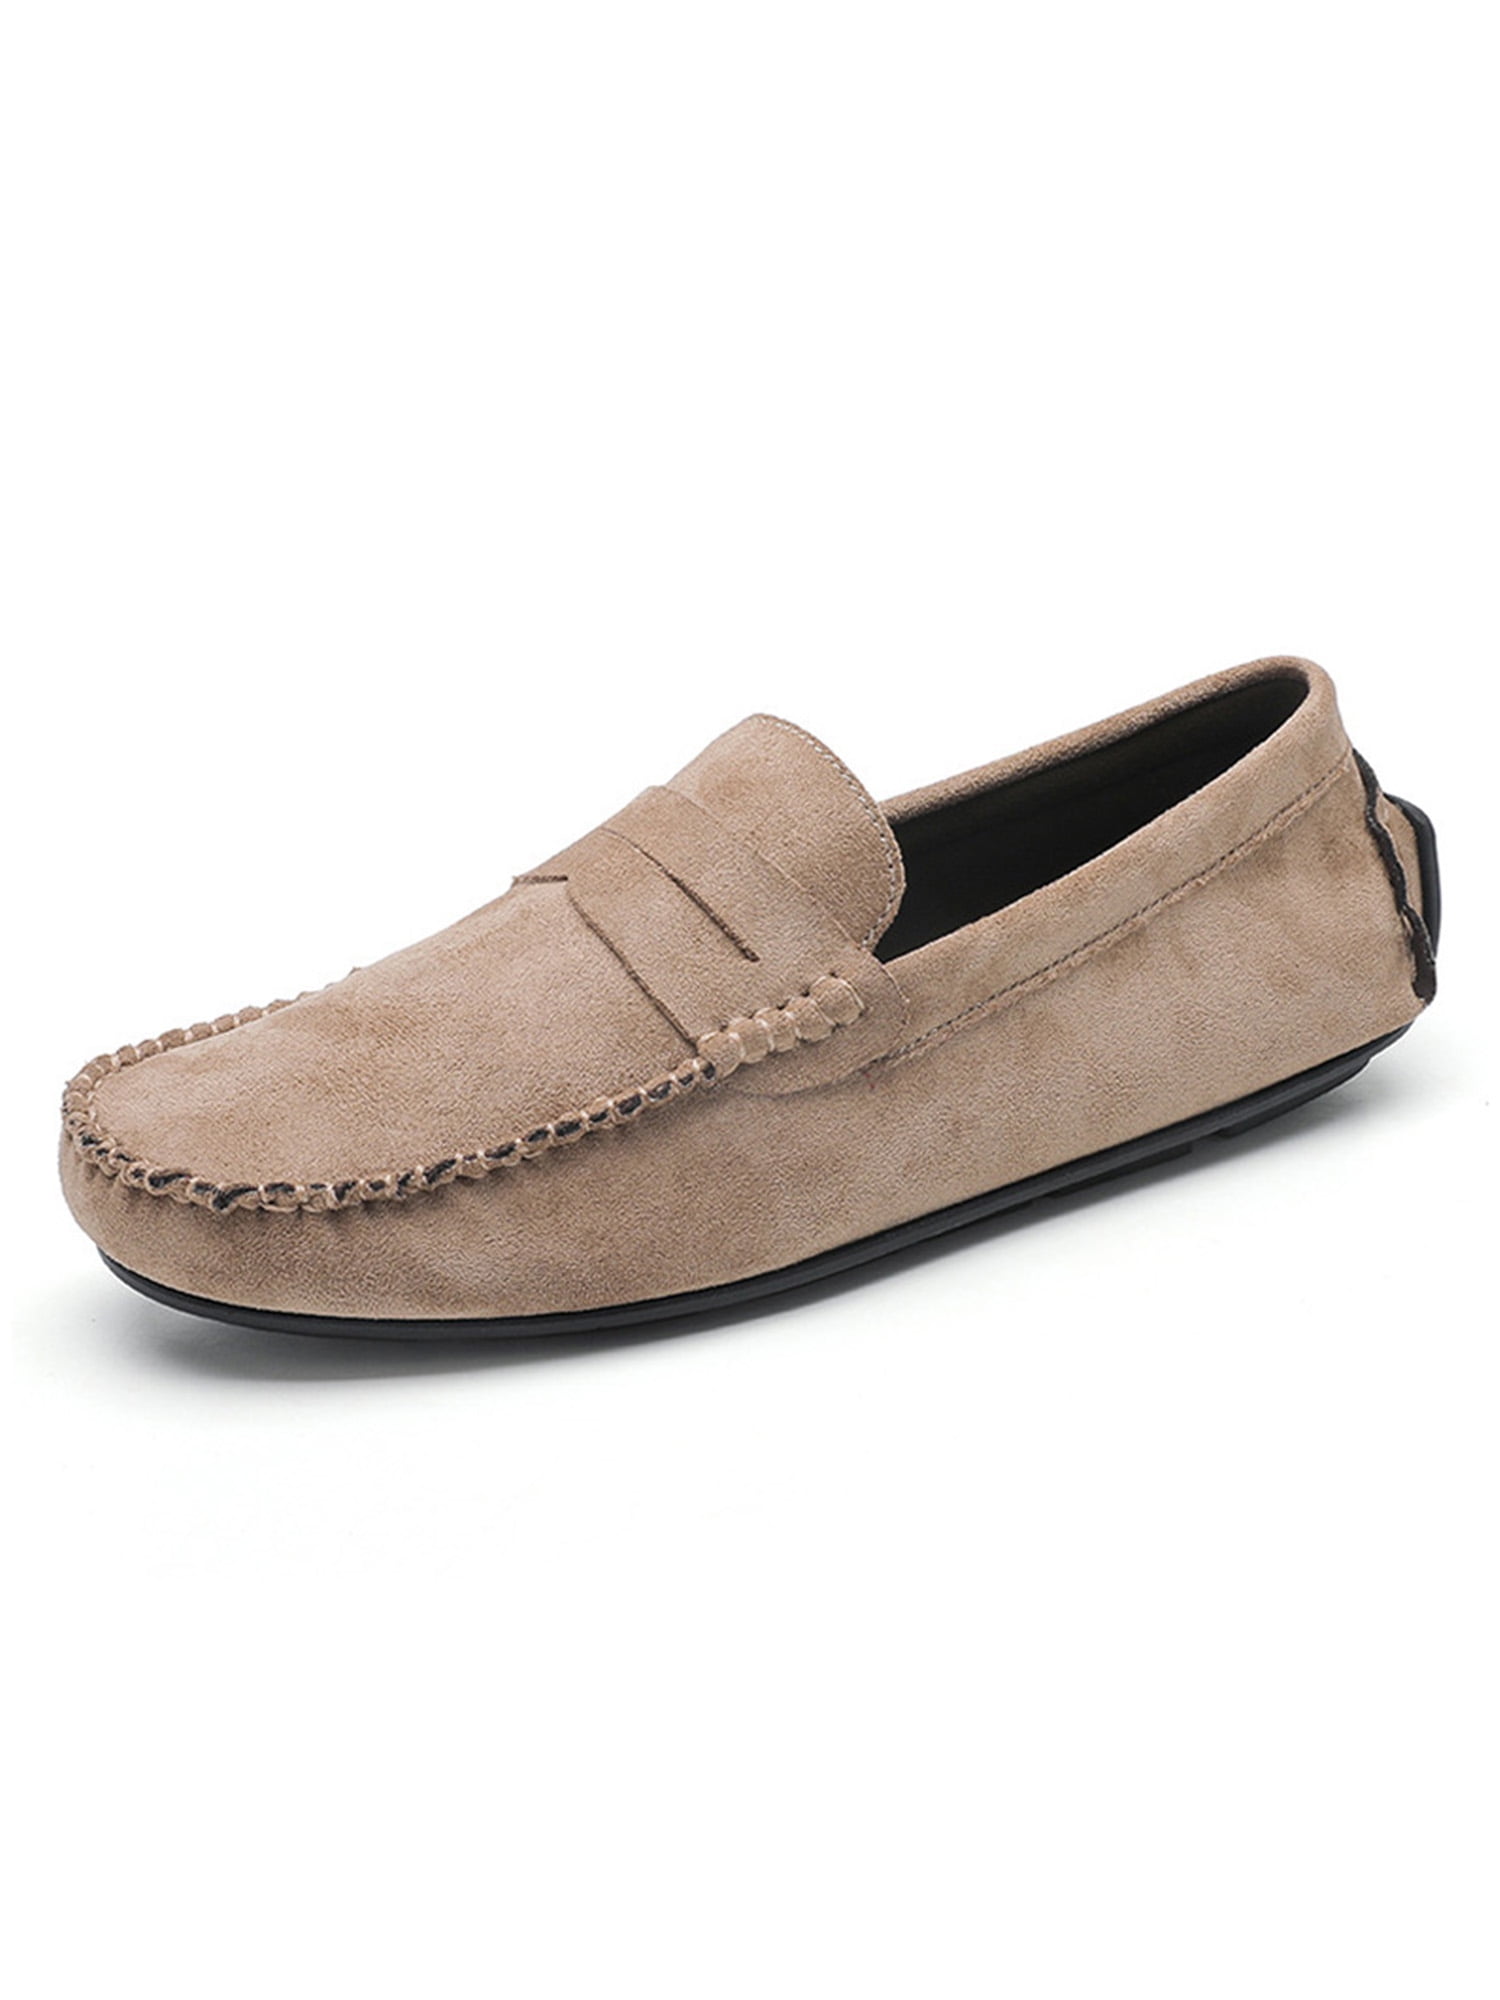 Men Driving Moccasins Slip On Flats Casual Suede Leather Penny Loafers Shoes 